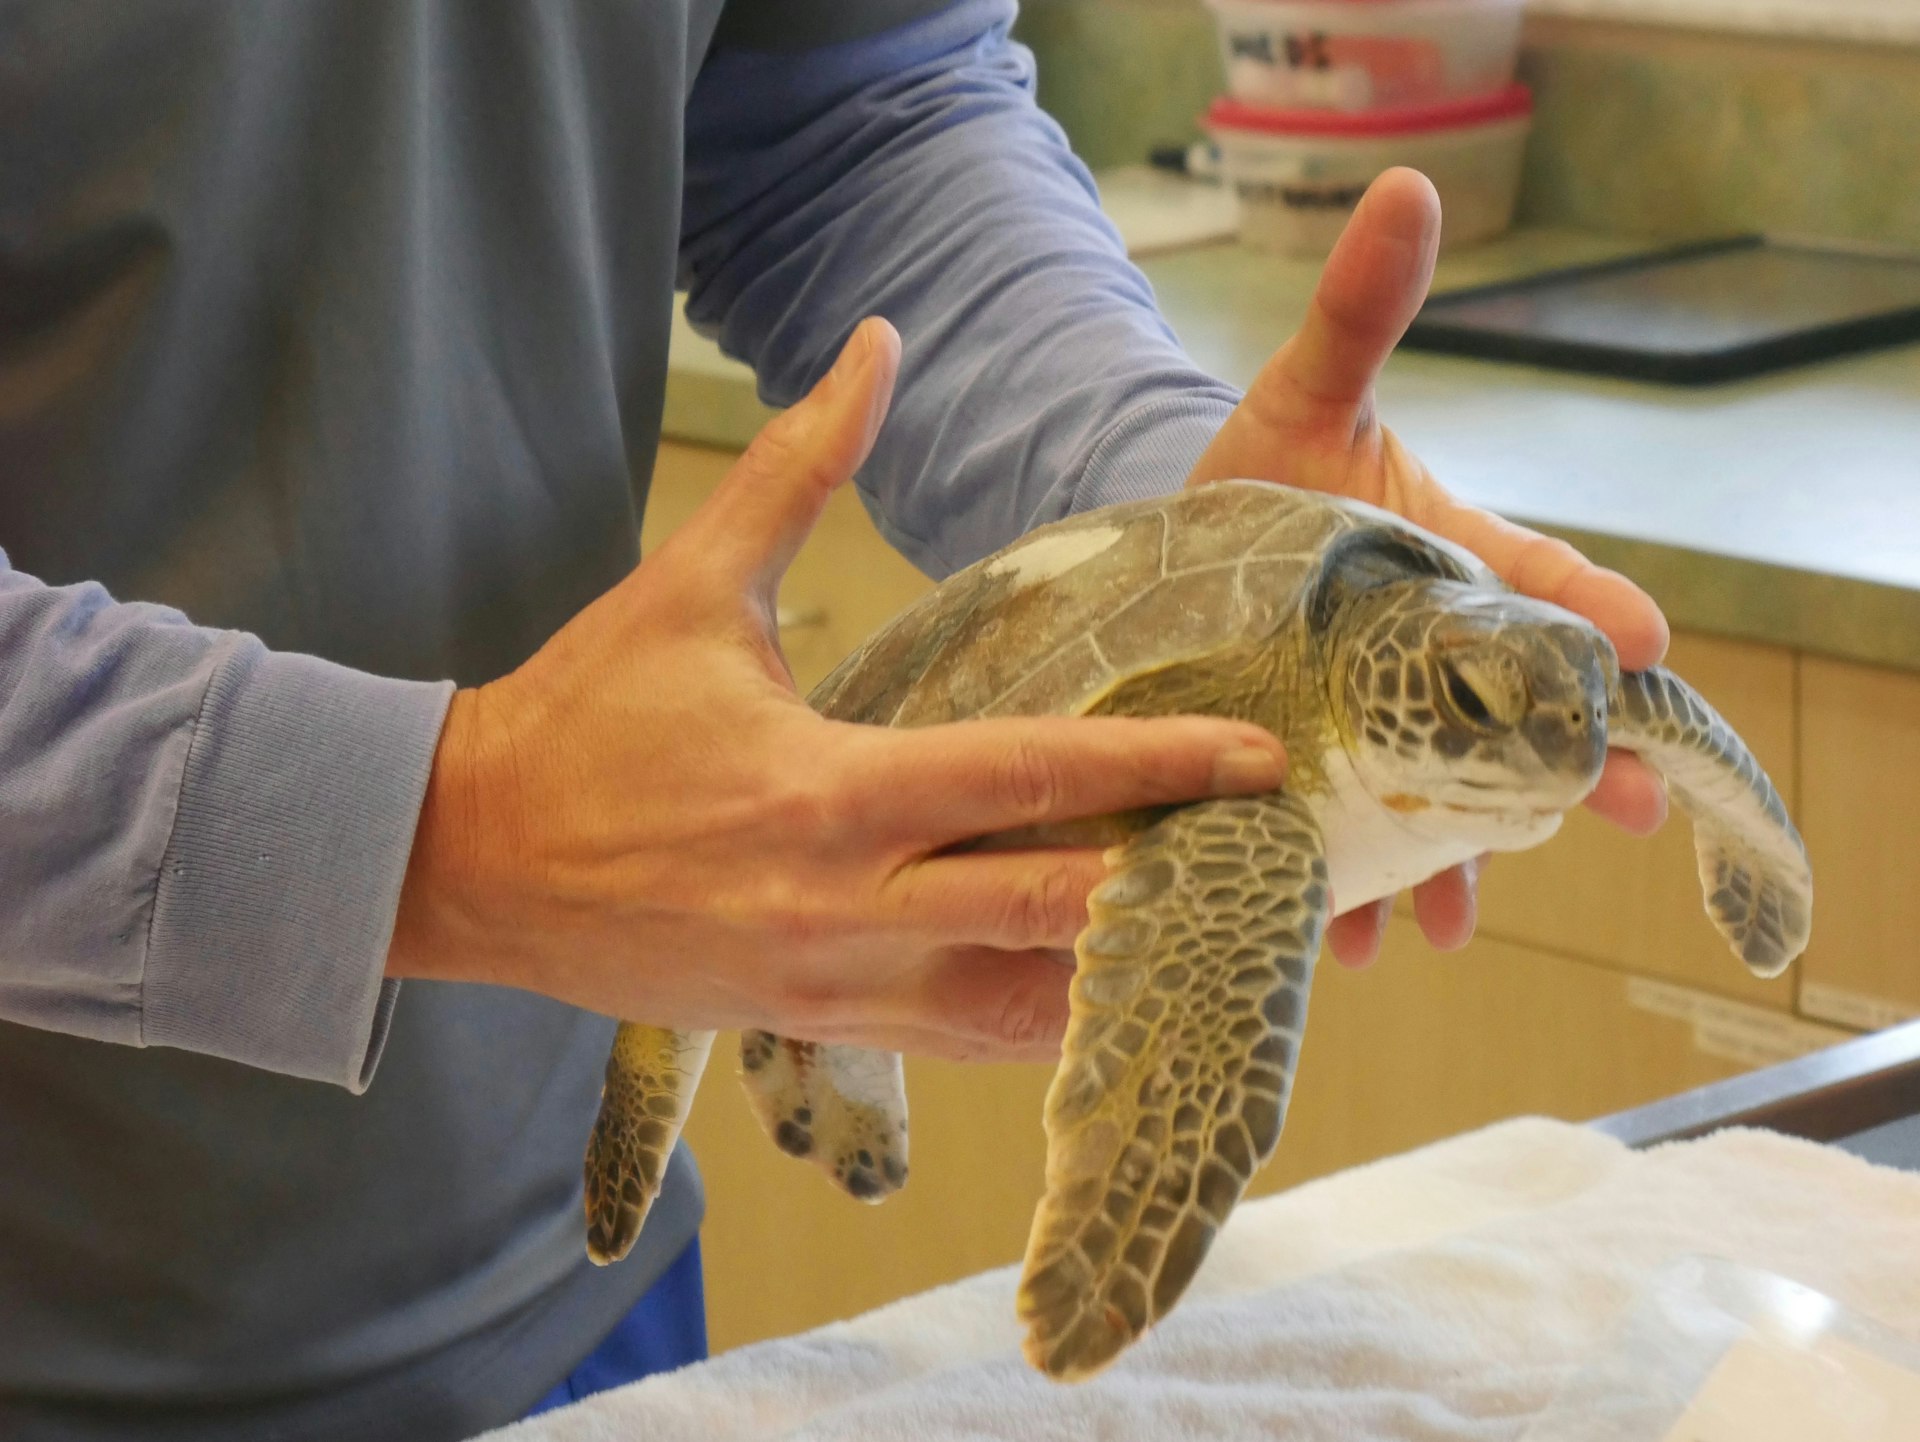 A sea turtle patient named Geo Jr. receives treatment at the Loggerhead Marinelife Center in Florida